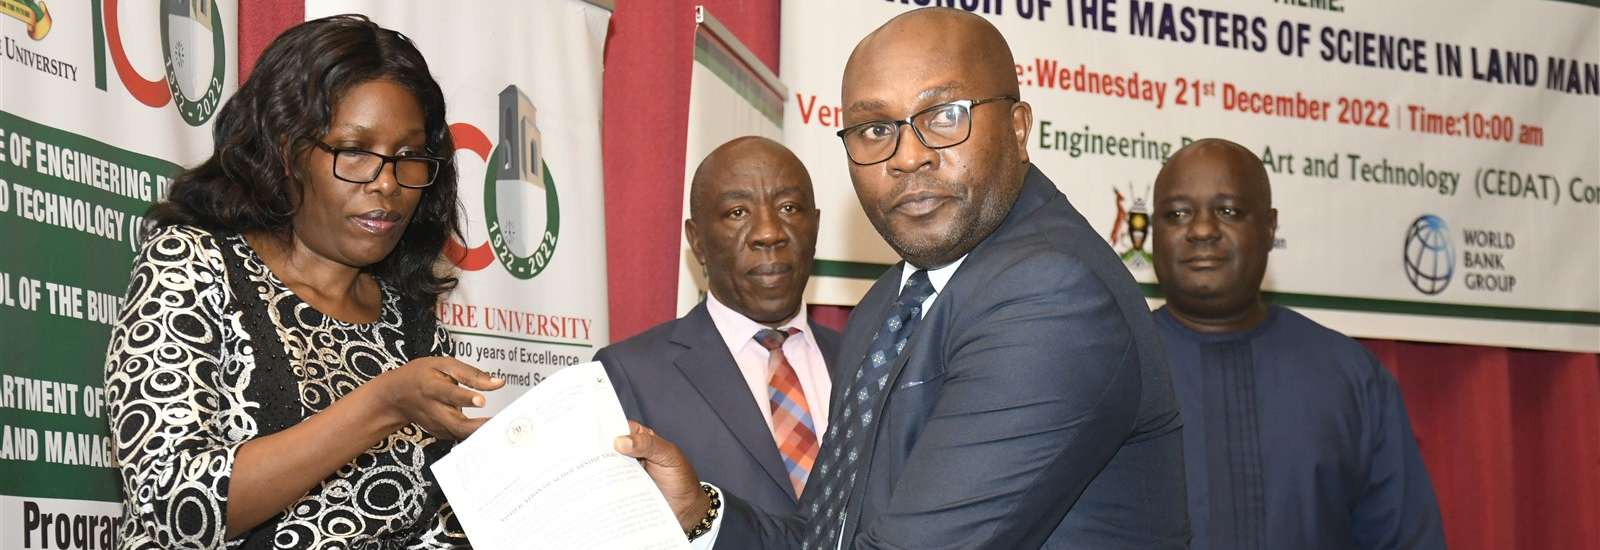 The Master of Science program in Land Management launched.